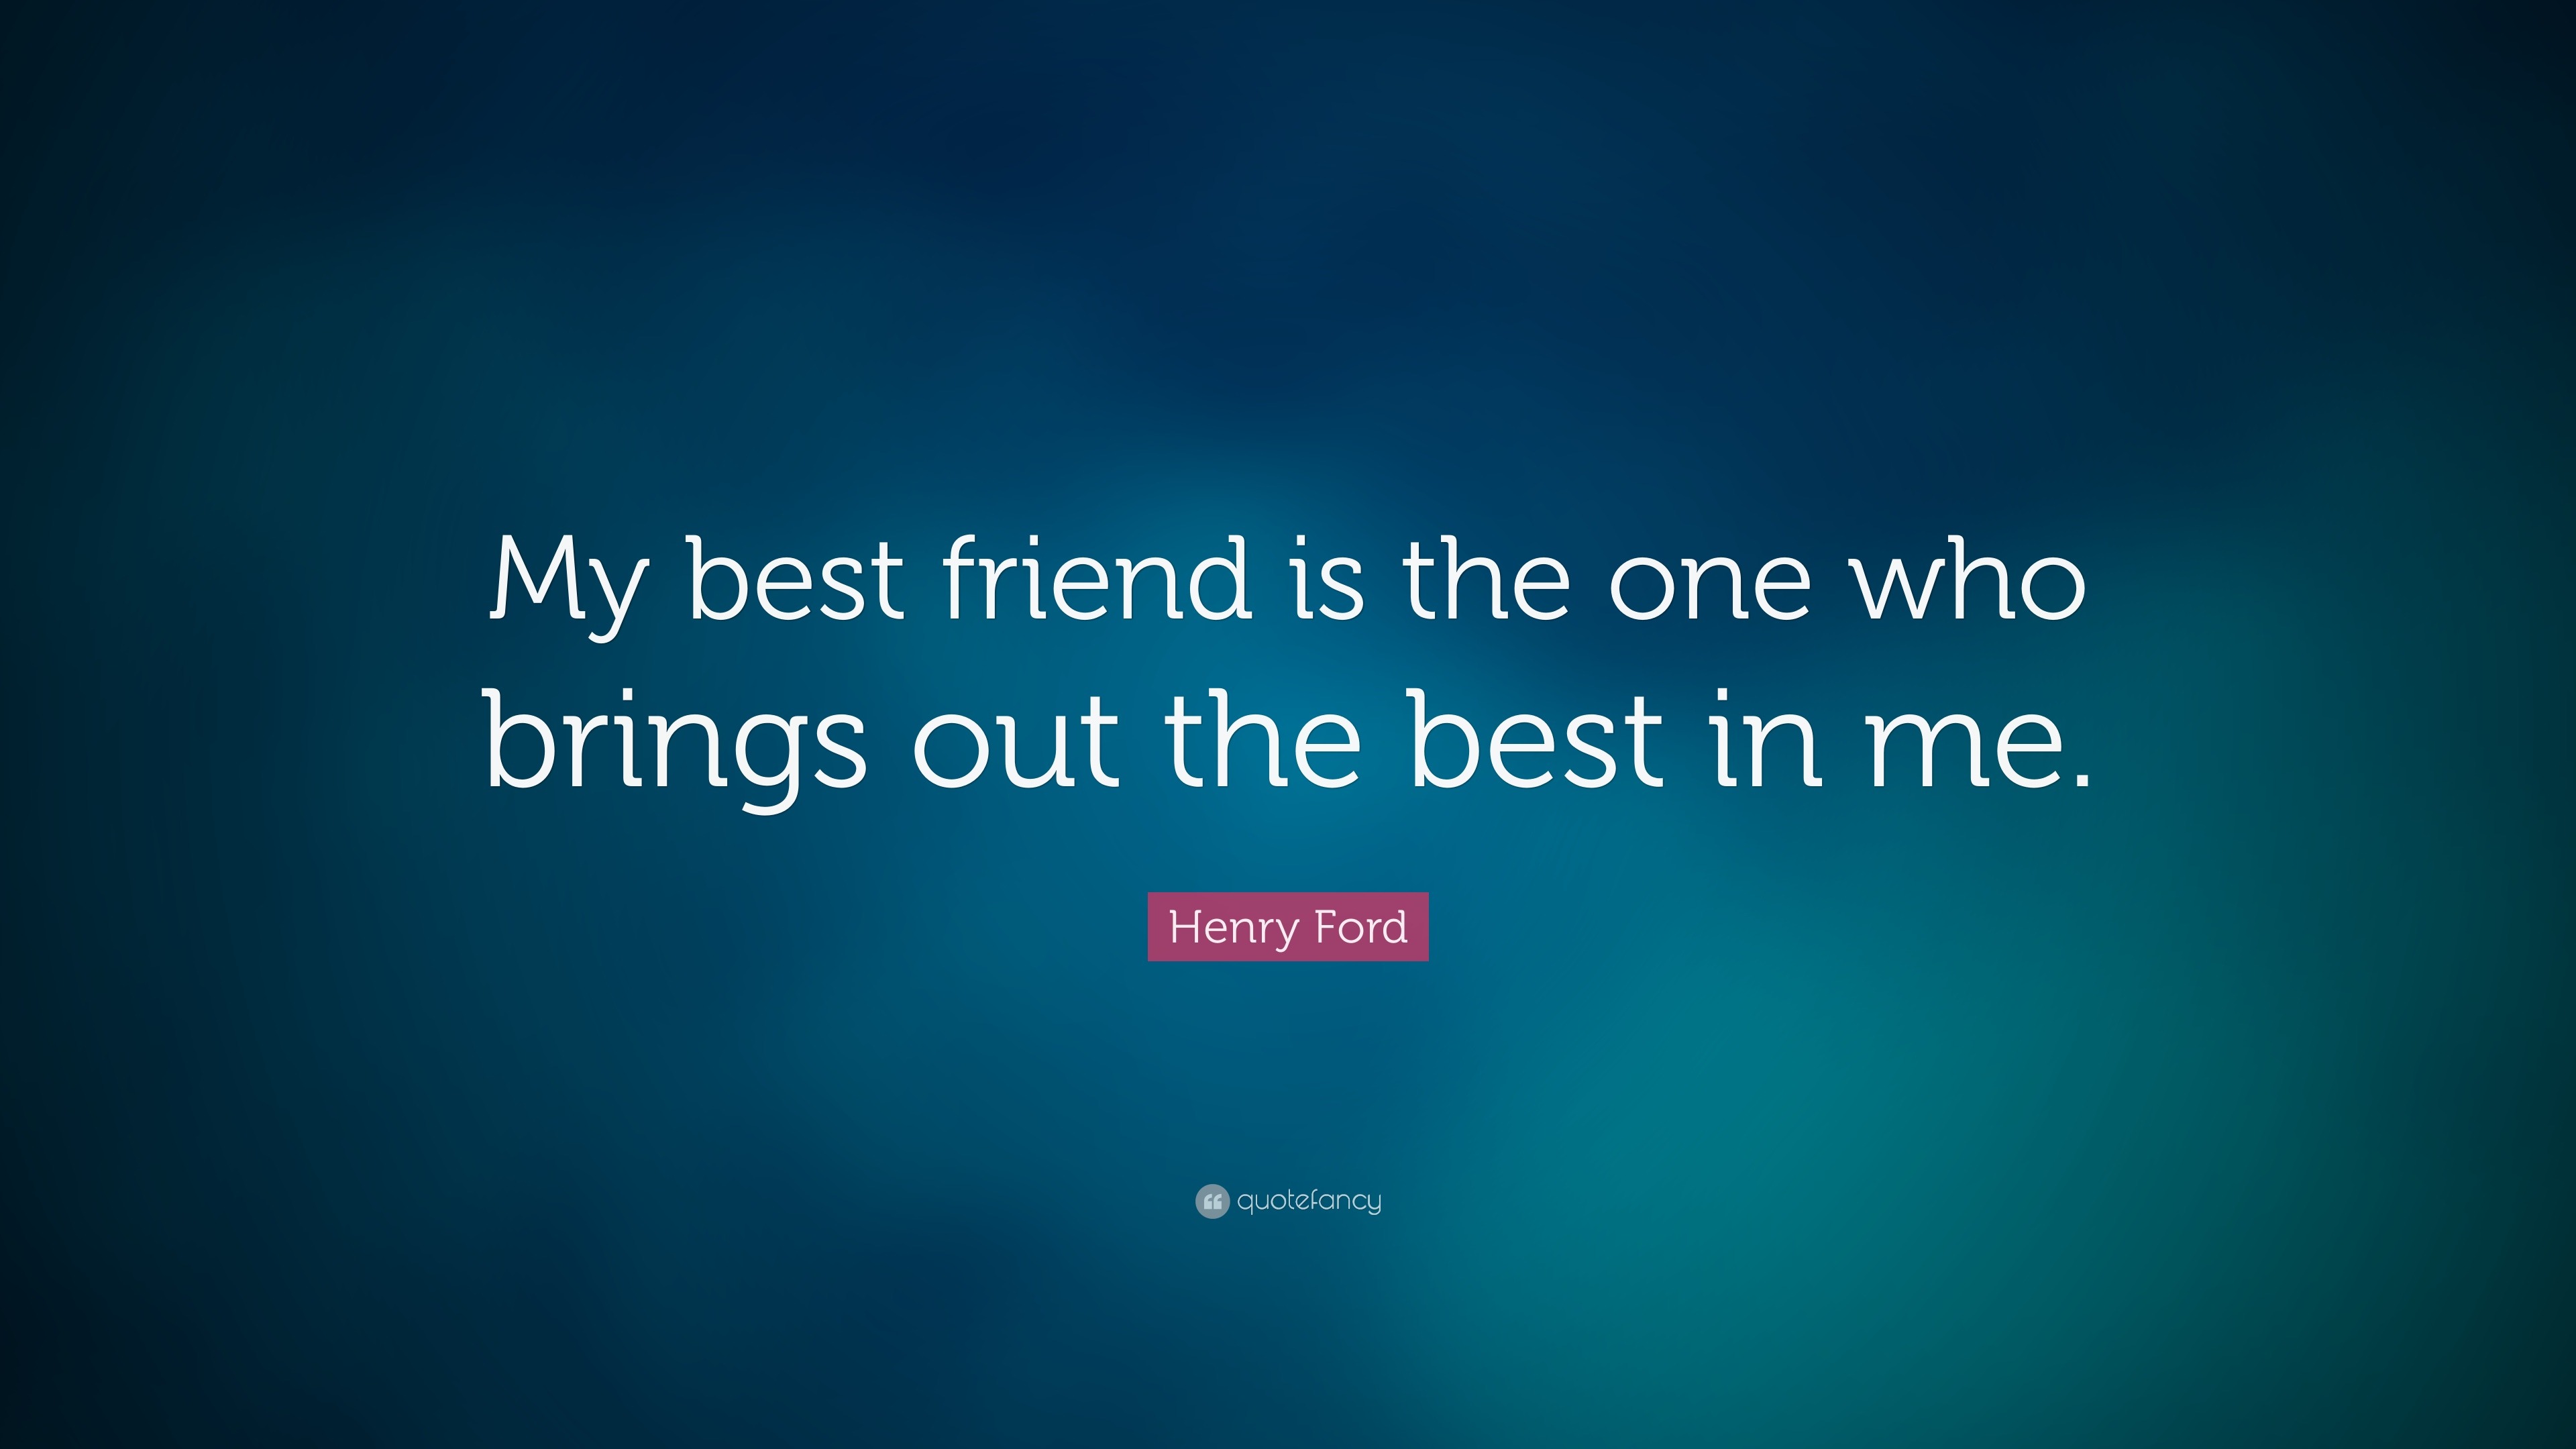 Henry Ford Quote: “My best friend is the one who brings out the best in ...